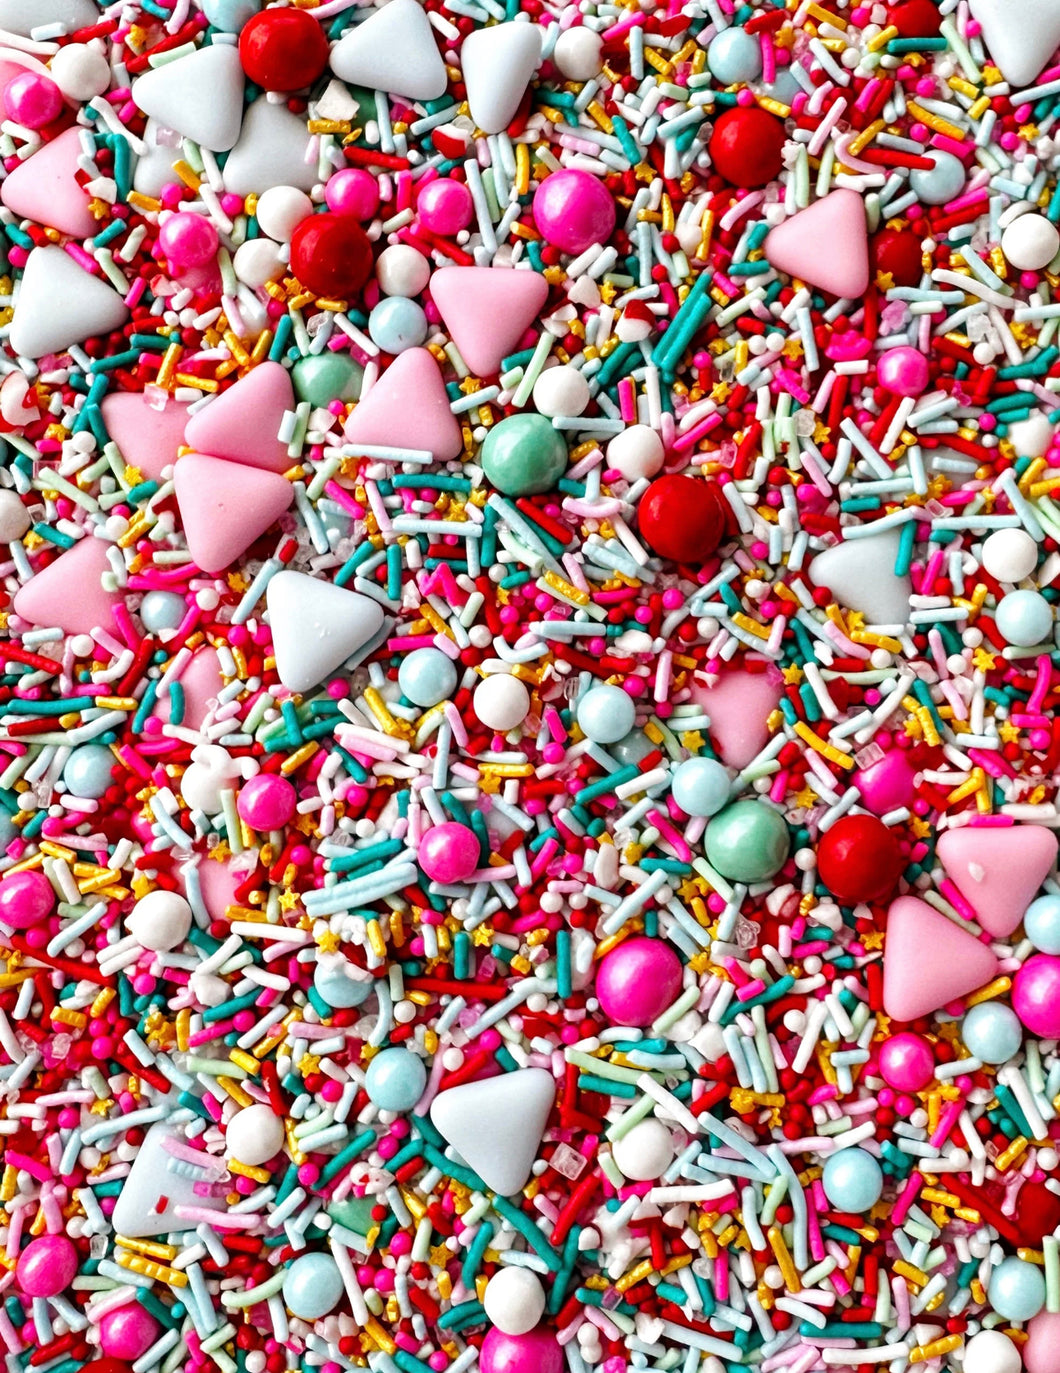 VARIETY SHAPED SPRINKLES INCLUDING ROUND AND TRIANGLE SHAPED TEAL RED LIGHT PINK HOT PINK WHITE LIGHT TEAL